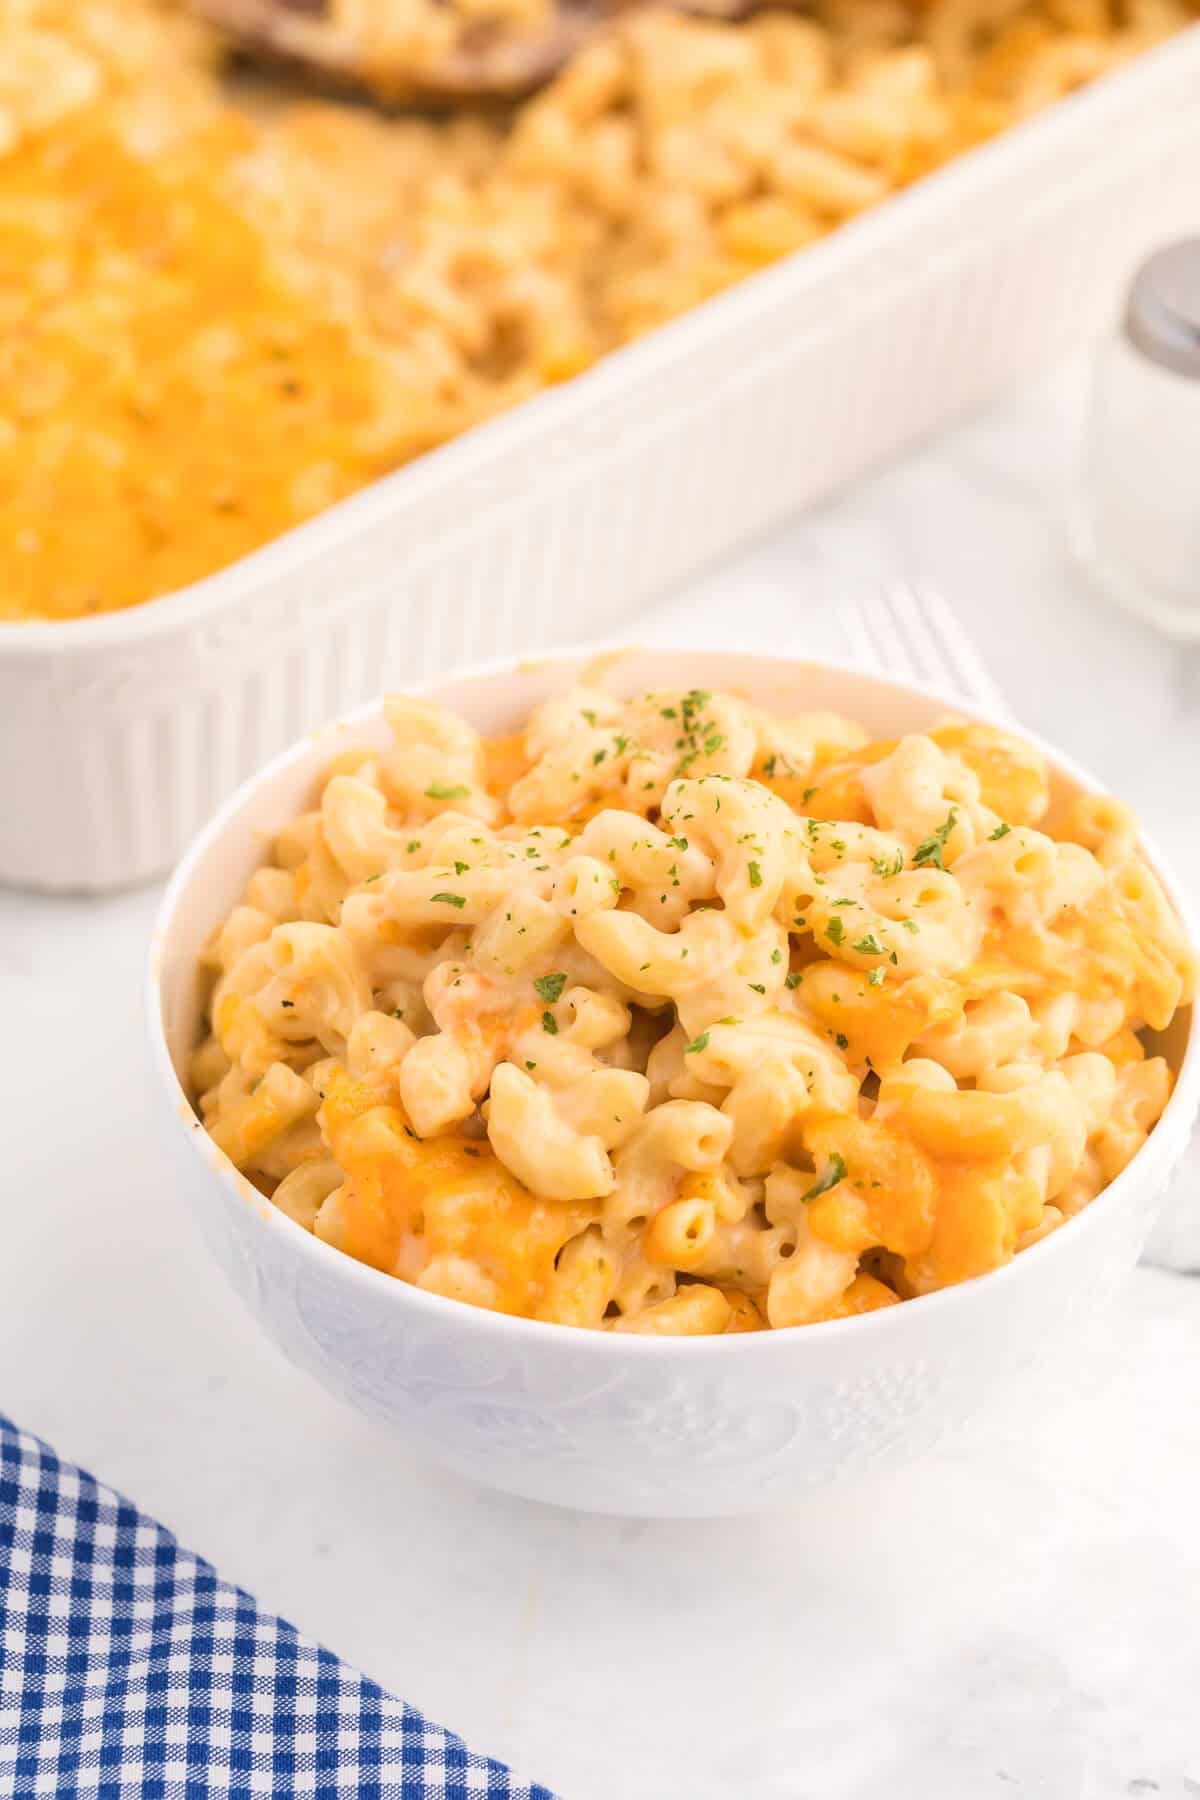 Baked Macaroni and Cheese - This old-fashioned classic recipe is a family favorite dinner and so easy to make. Tender elbow macaroni noodles are enveloped in an ultra creamy homemade cheese sauce and covered with melted cheddar cheese.